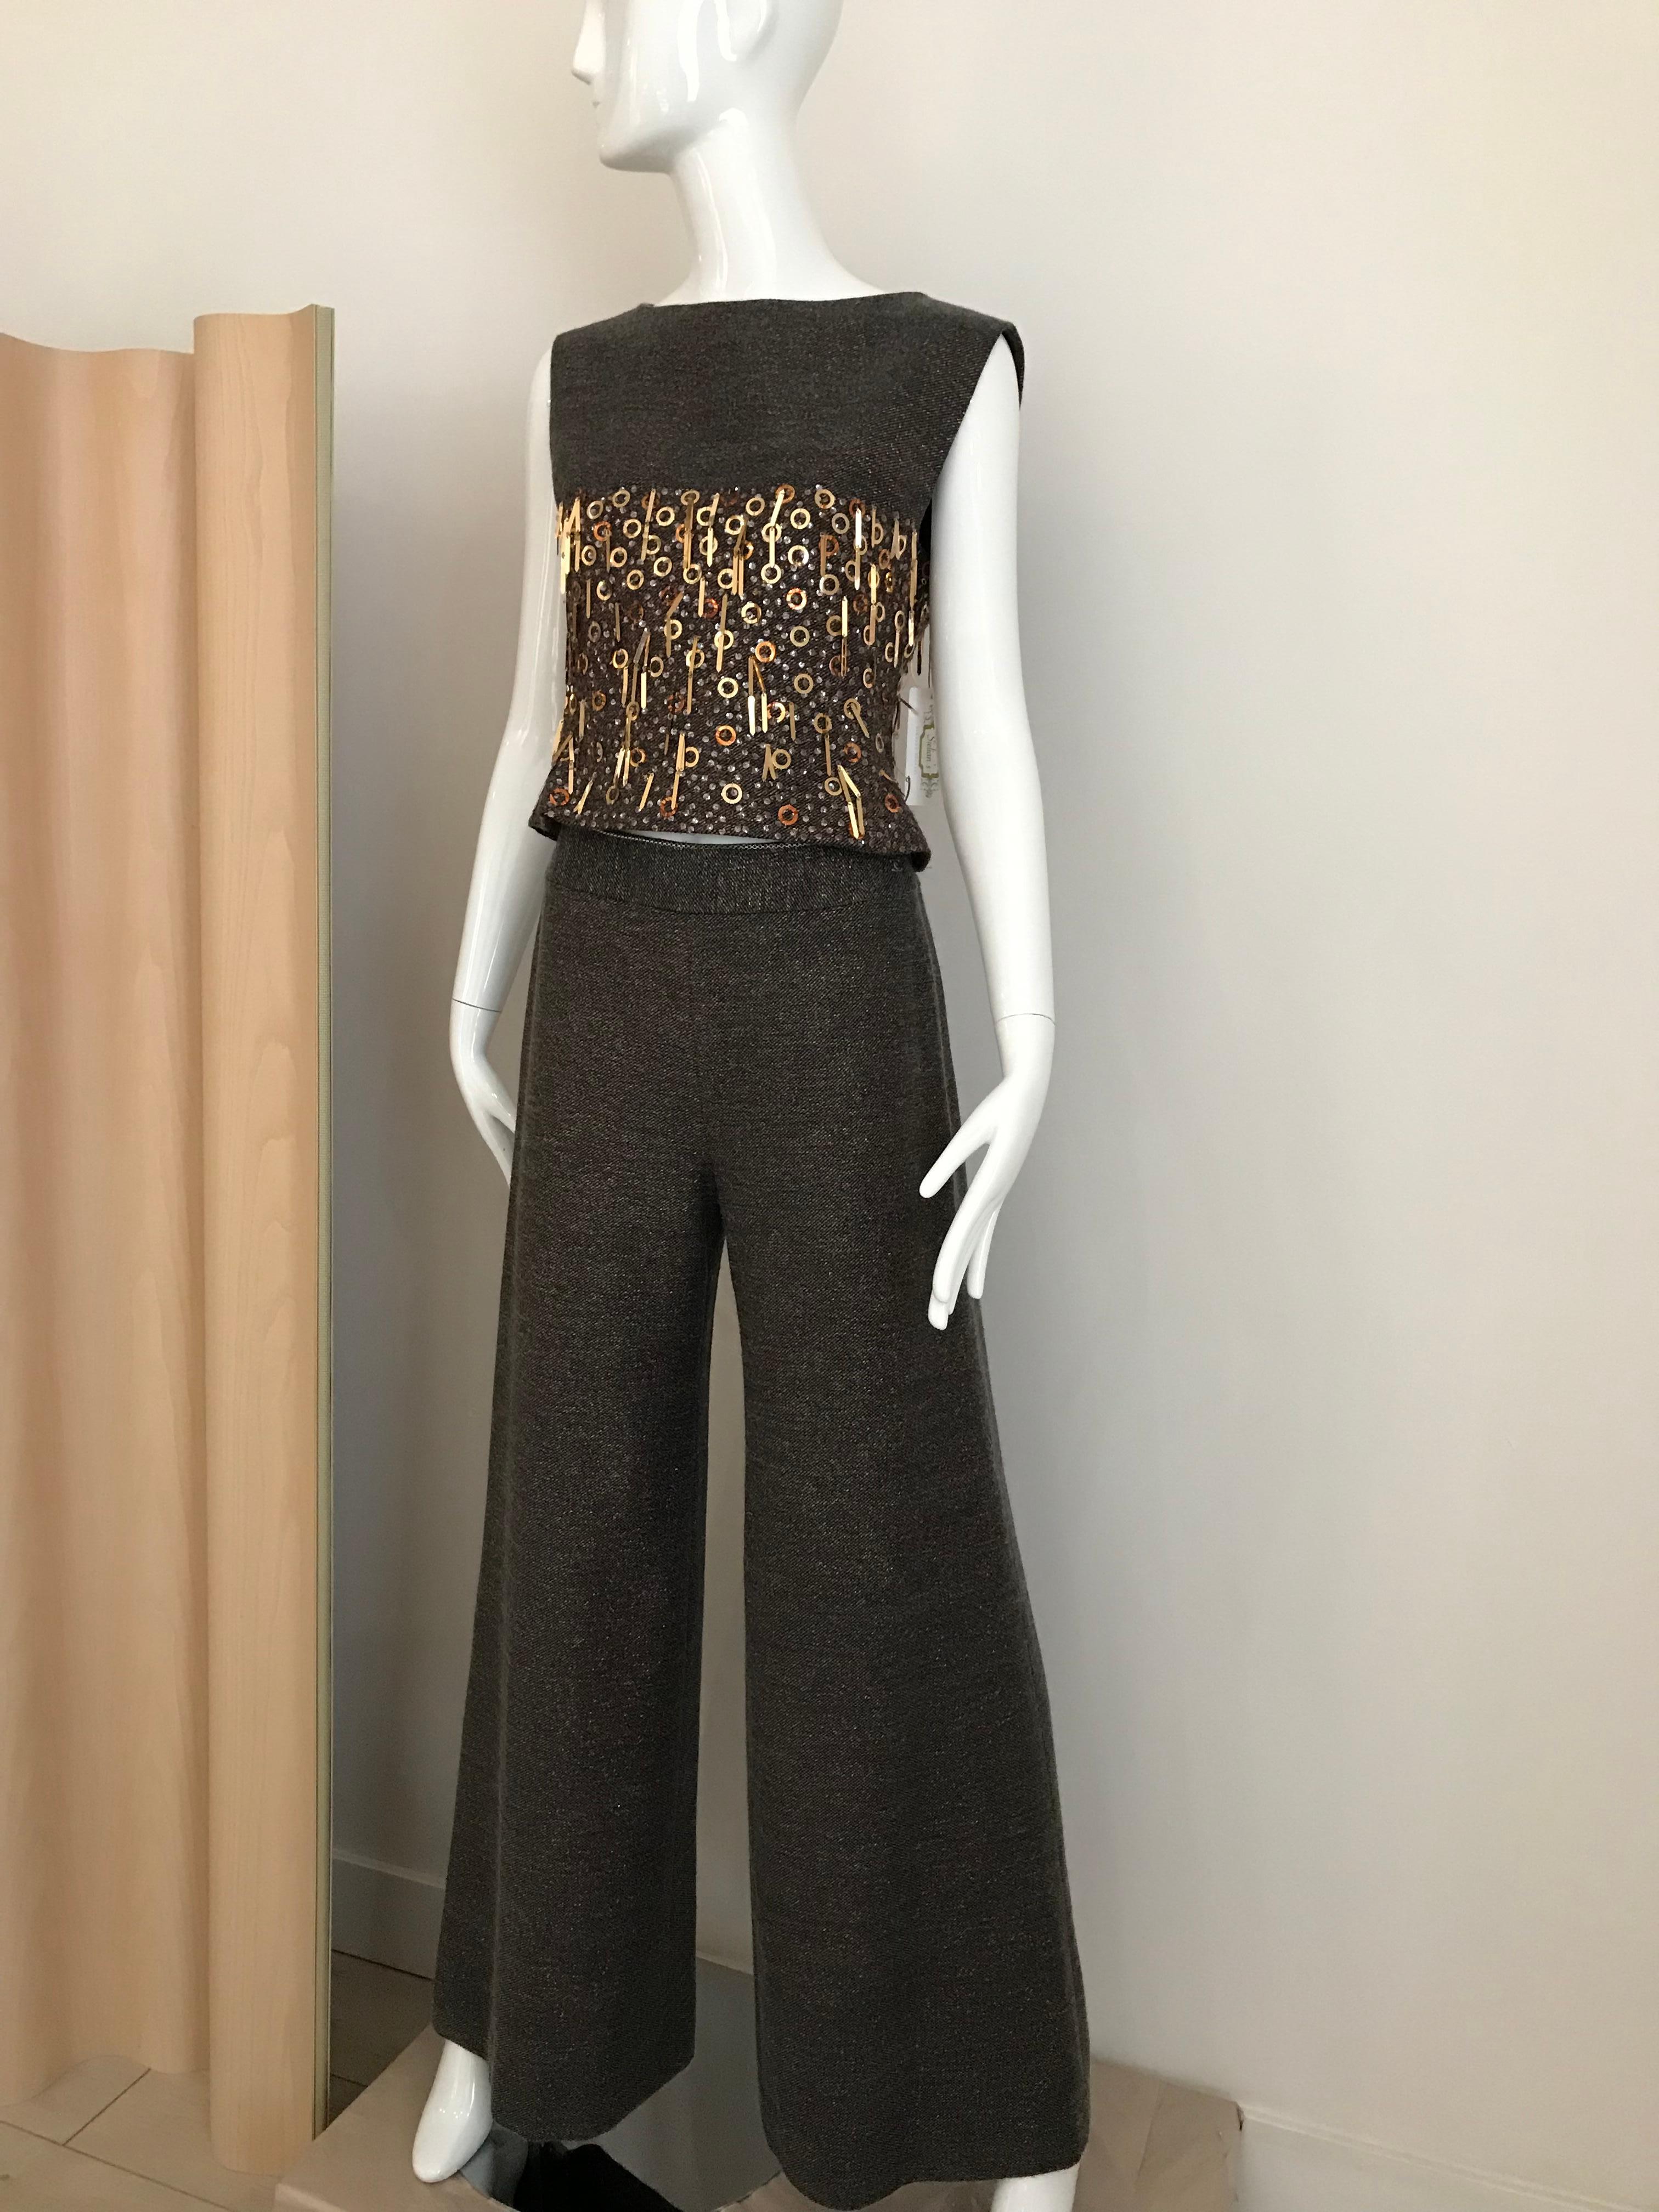 2000 Chanel  brown wool lined in silk with gold and bronze Pailletes.
Top measurement: Bust: 32 inches/  waist: 28 inches
Pant waist: 26 inches/ Hip: 38 inches/ Pants length: 43.5 inches
Fit size Small / 2-4 